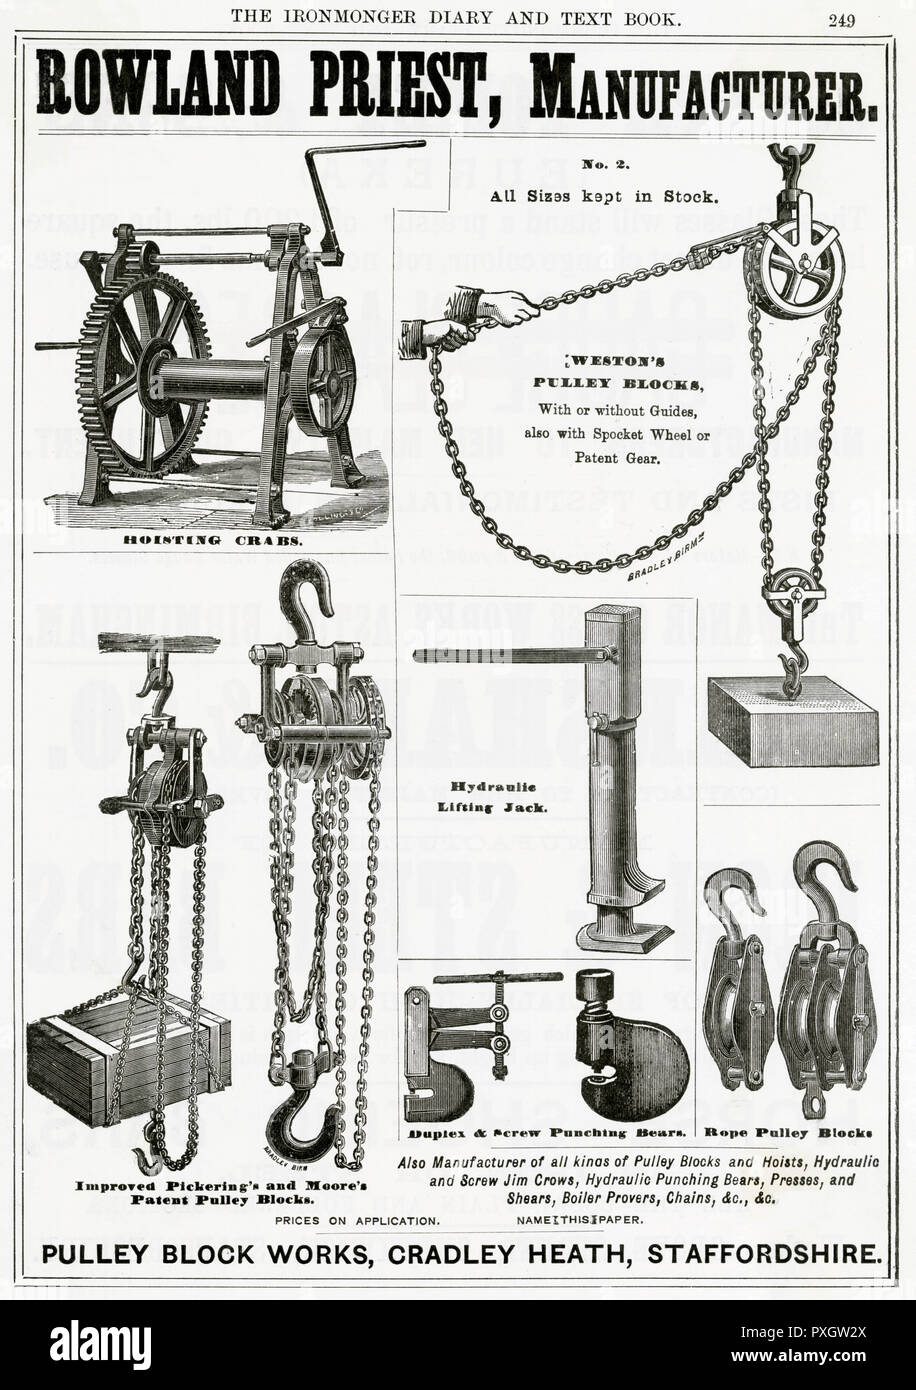 Advert for Rowland Priest, manufacturer of pulleys 1889 Stock Photo